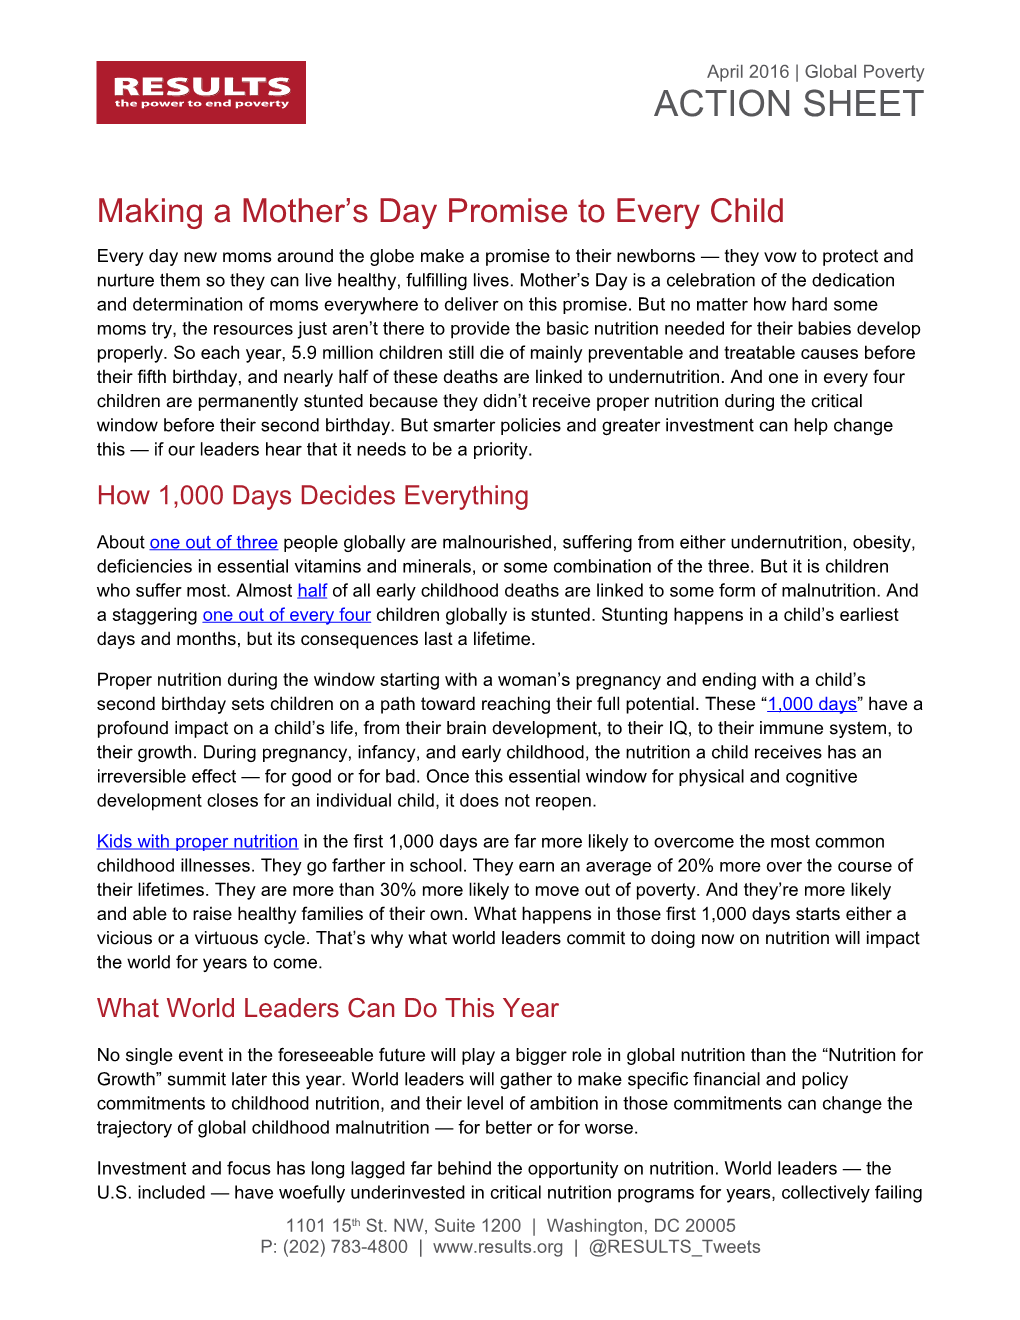 Making a Mother S Day Promise to Every Child